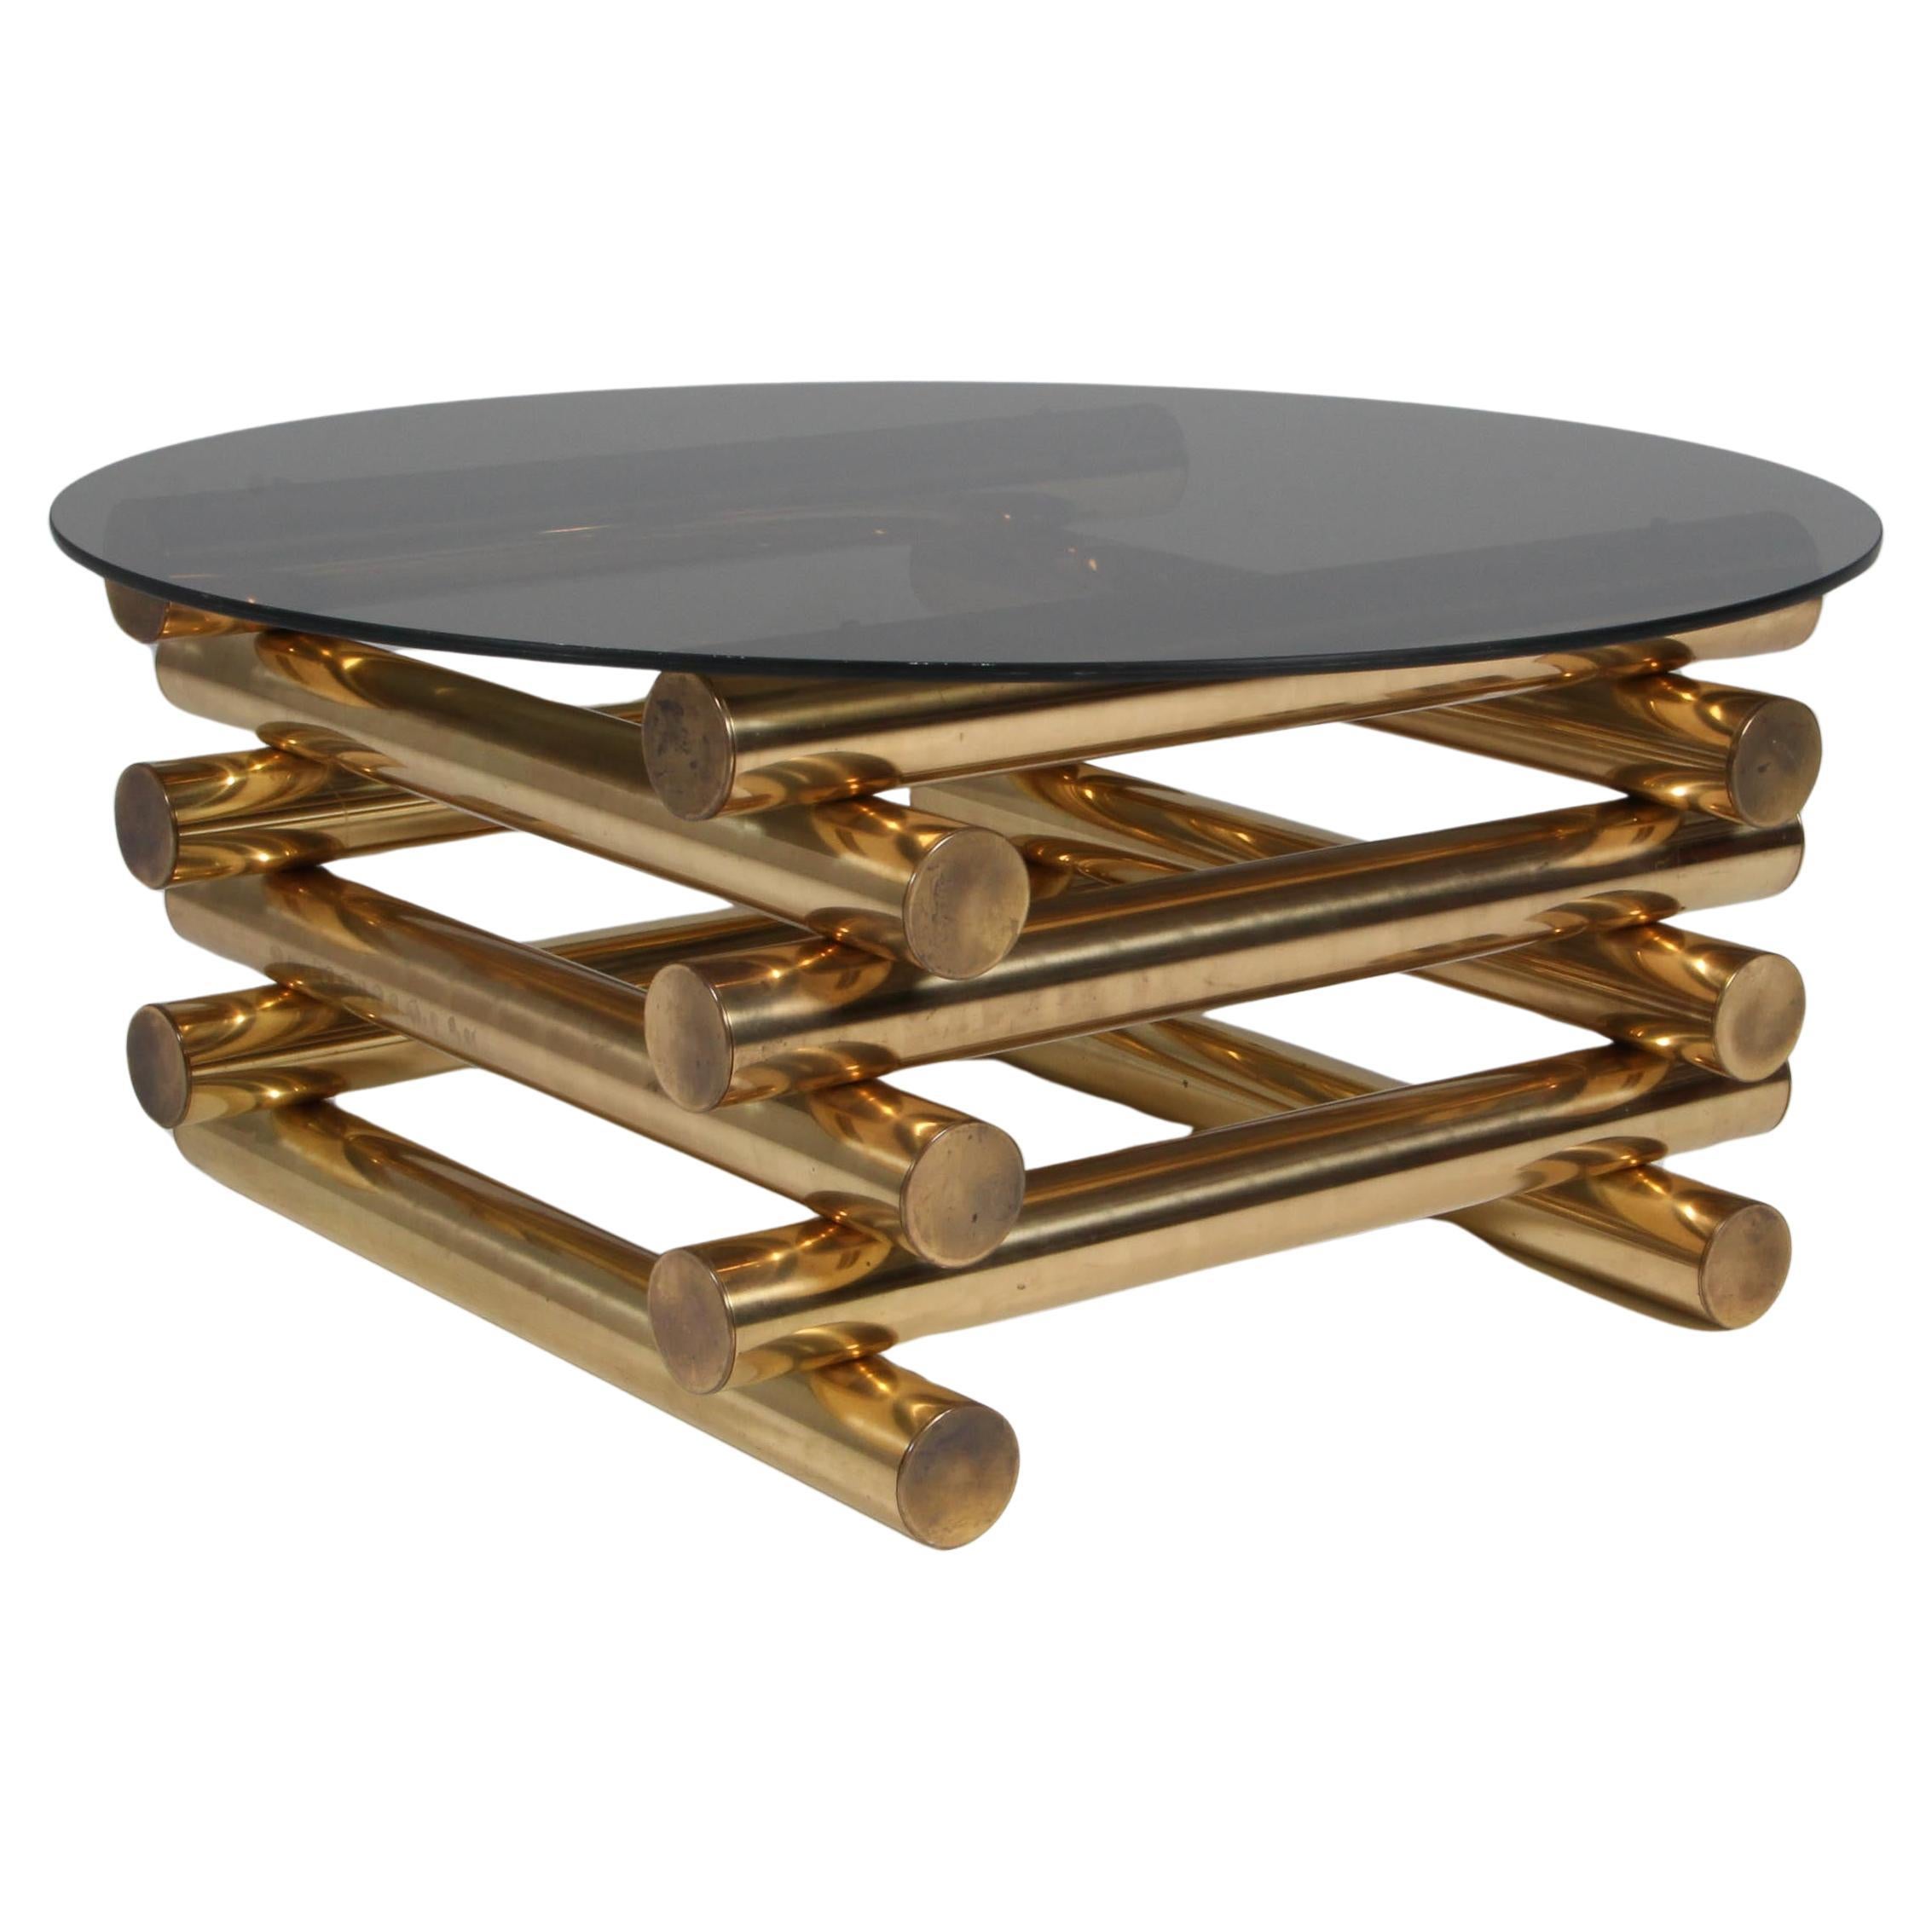 1970's Vintage Brass Coffee Table by Pieff, deisgned by Tim Bates